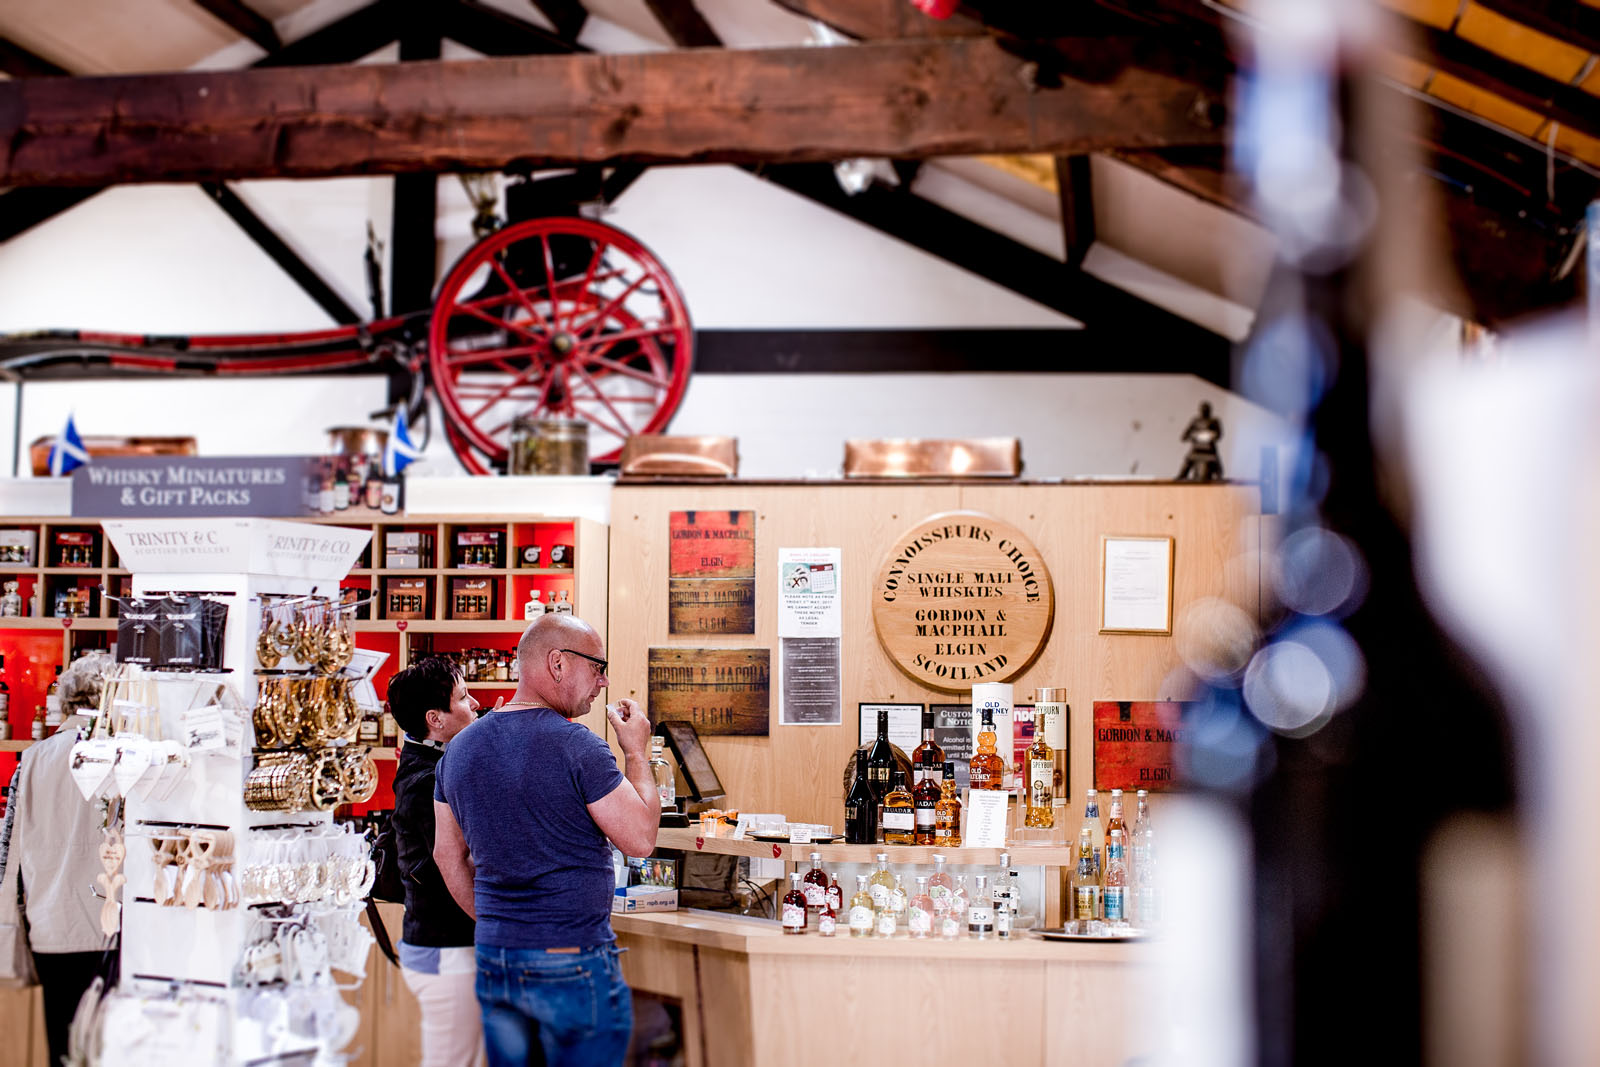 Try Whisky and Gin tasting at Gretna Green Famous Blacksmiths Shop's Whisky & Gifts